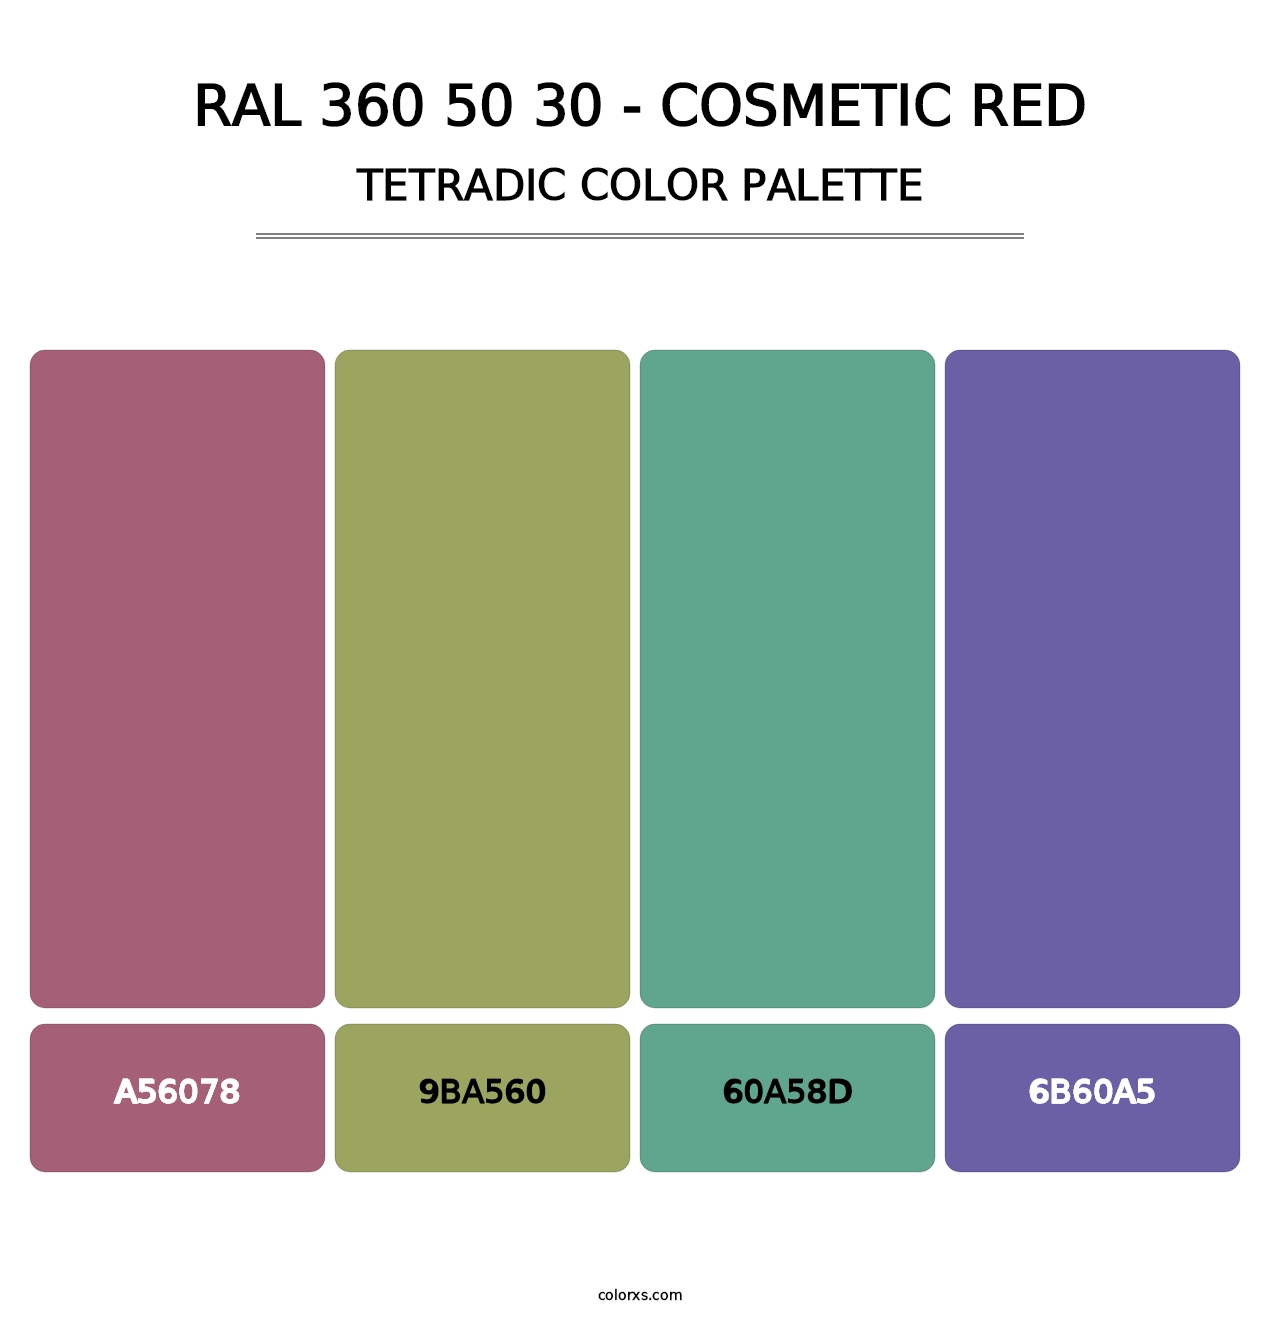 RAL 360 50 30 - Cosmetic Red - Tetradic Color Palette